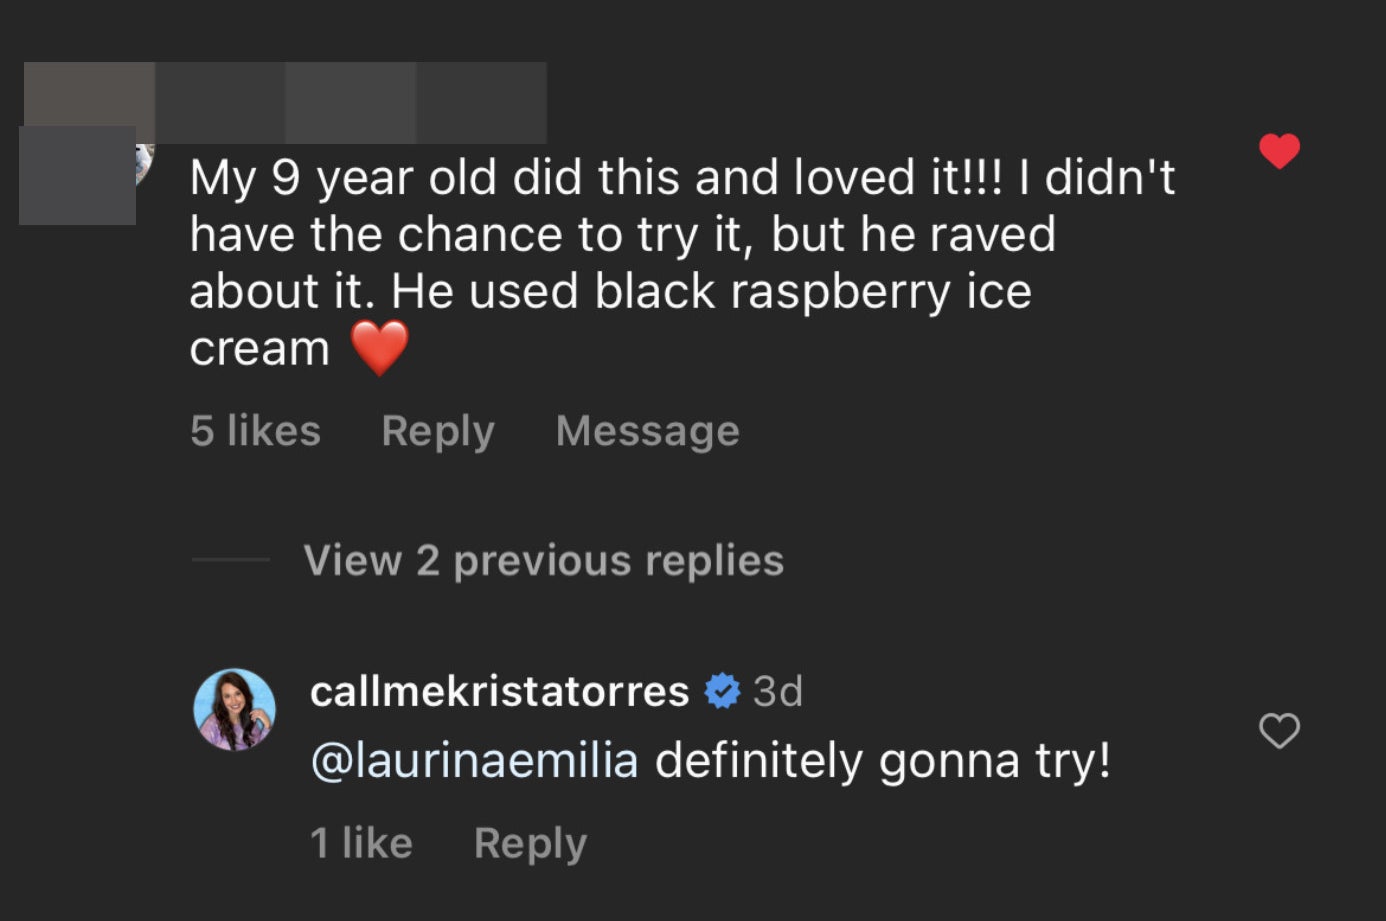 Comment: My 9 year old did this and loved it!!! I didn&#x27;t have the chance to try it, but he raved about it; he used black raspberry ice cream